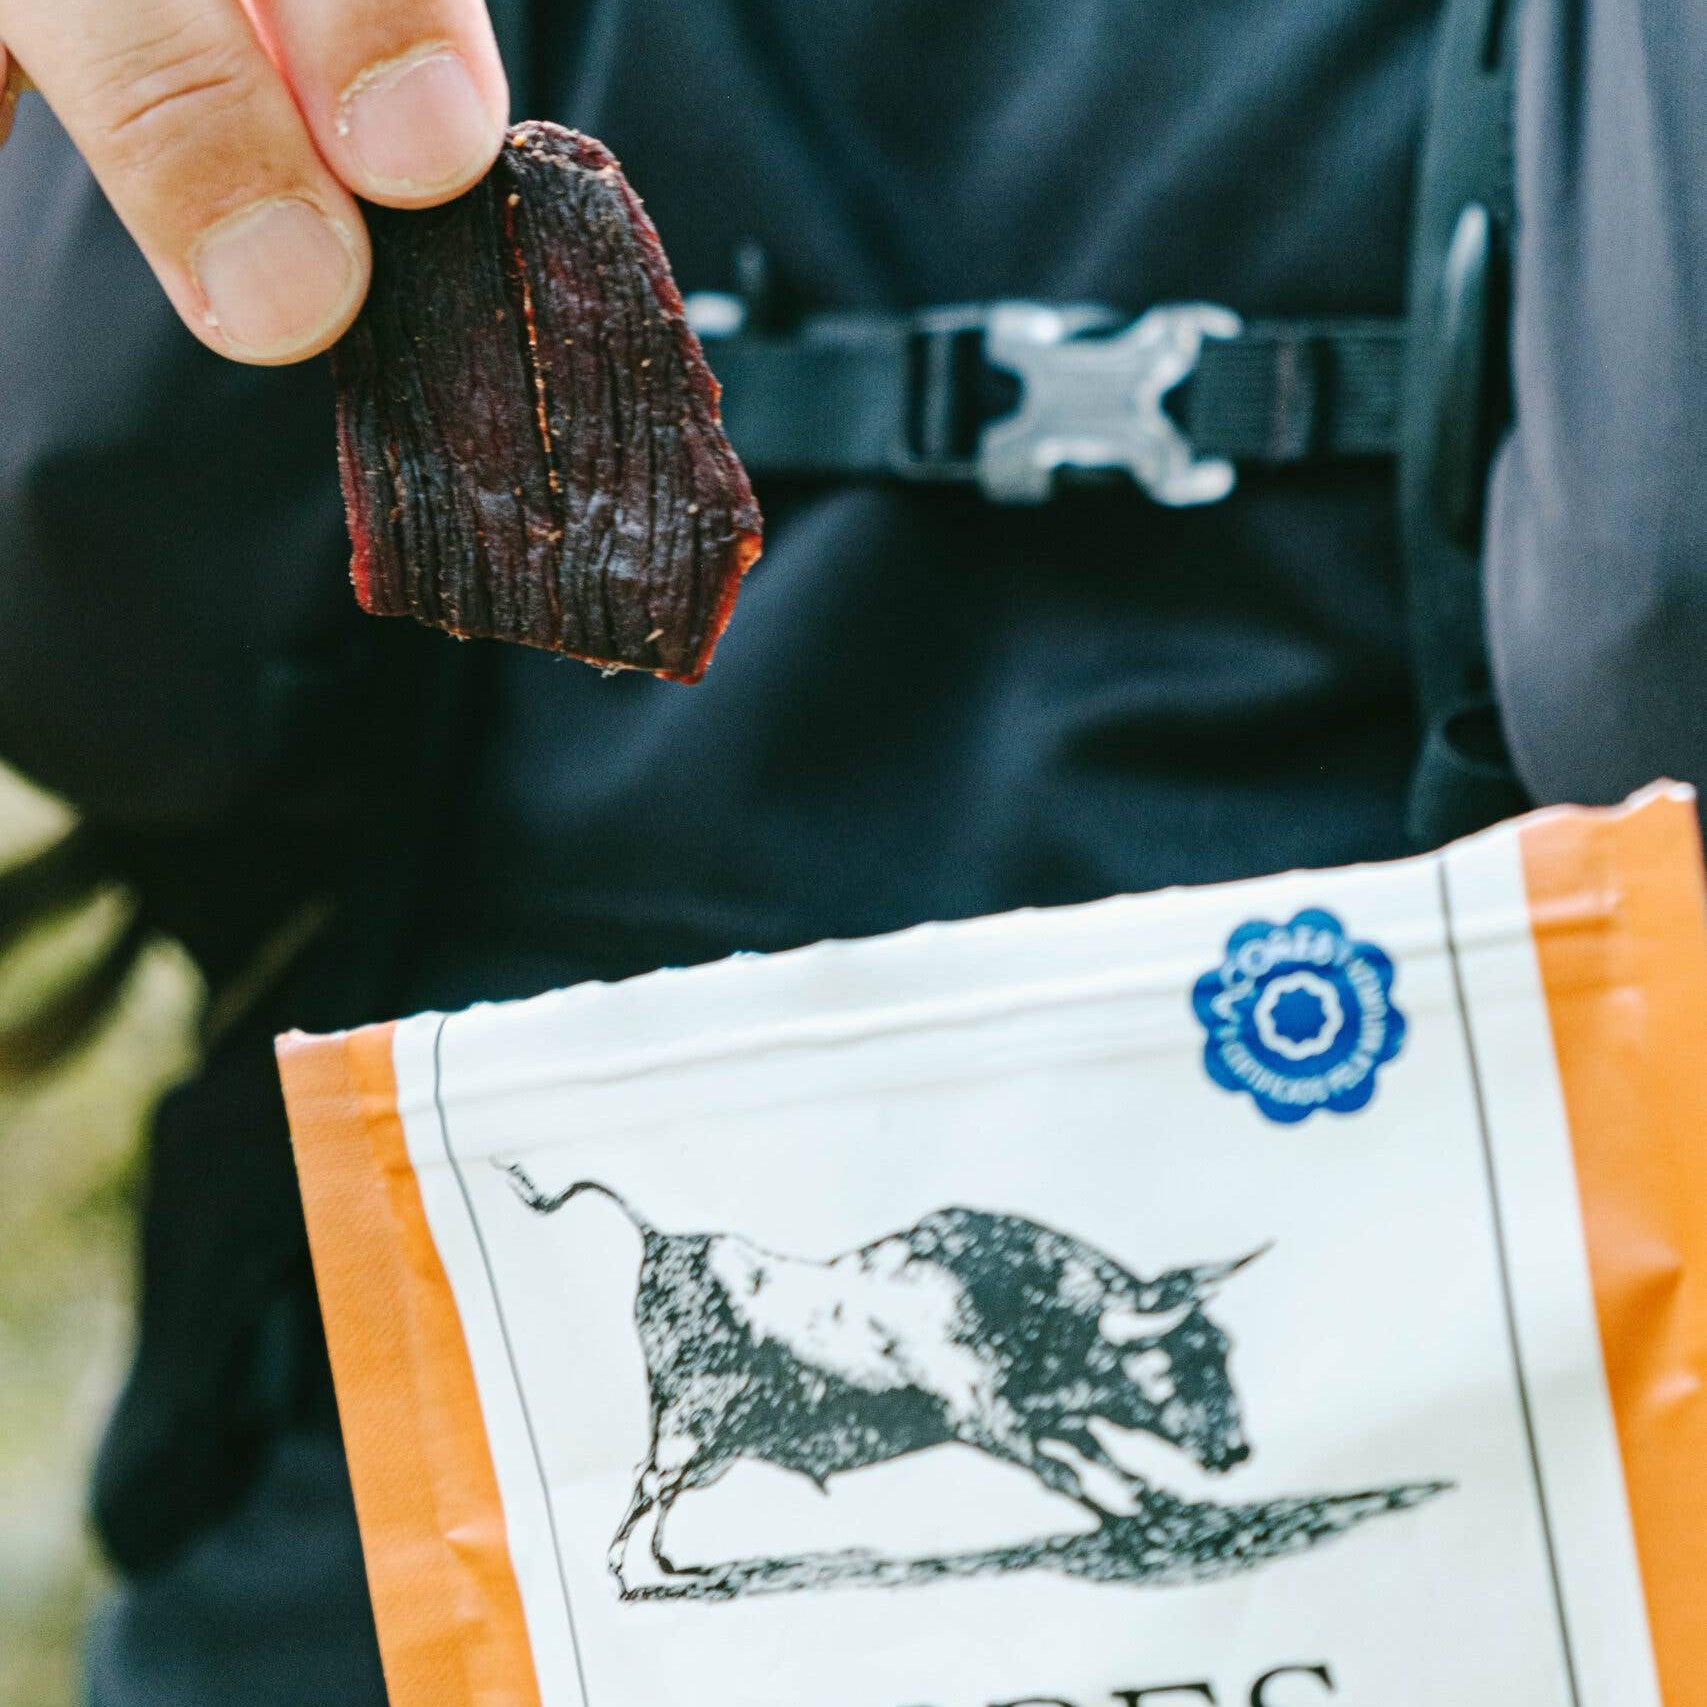 Pack of Azores Beef Jerky gift idea